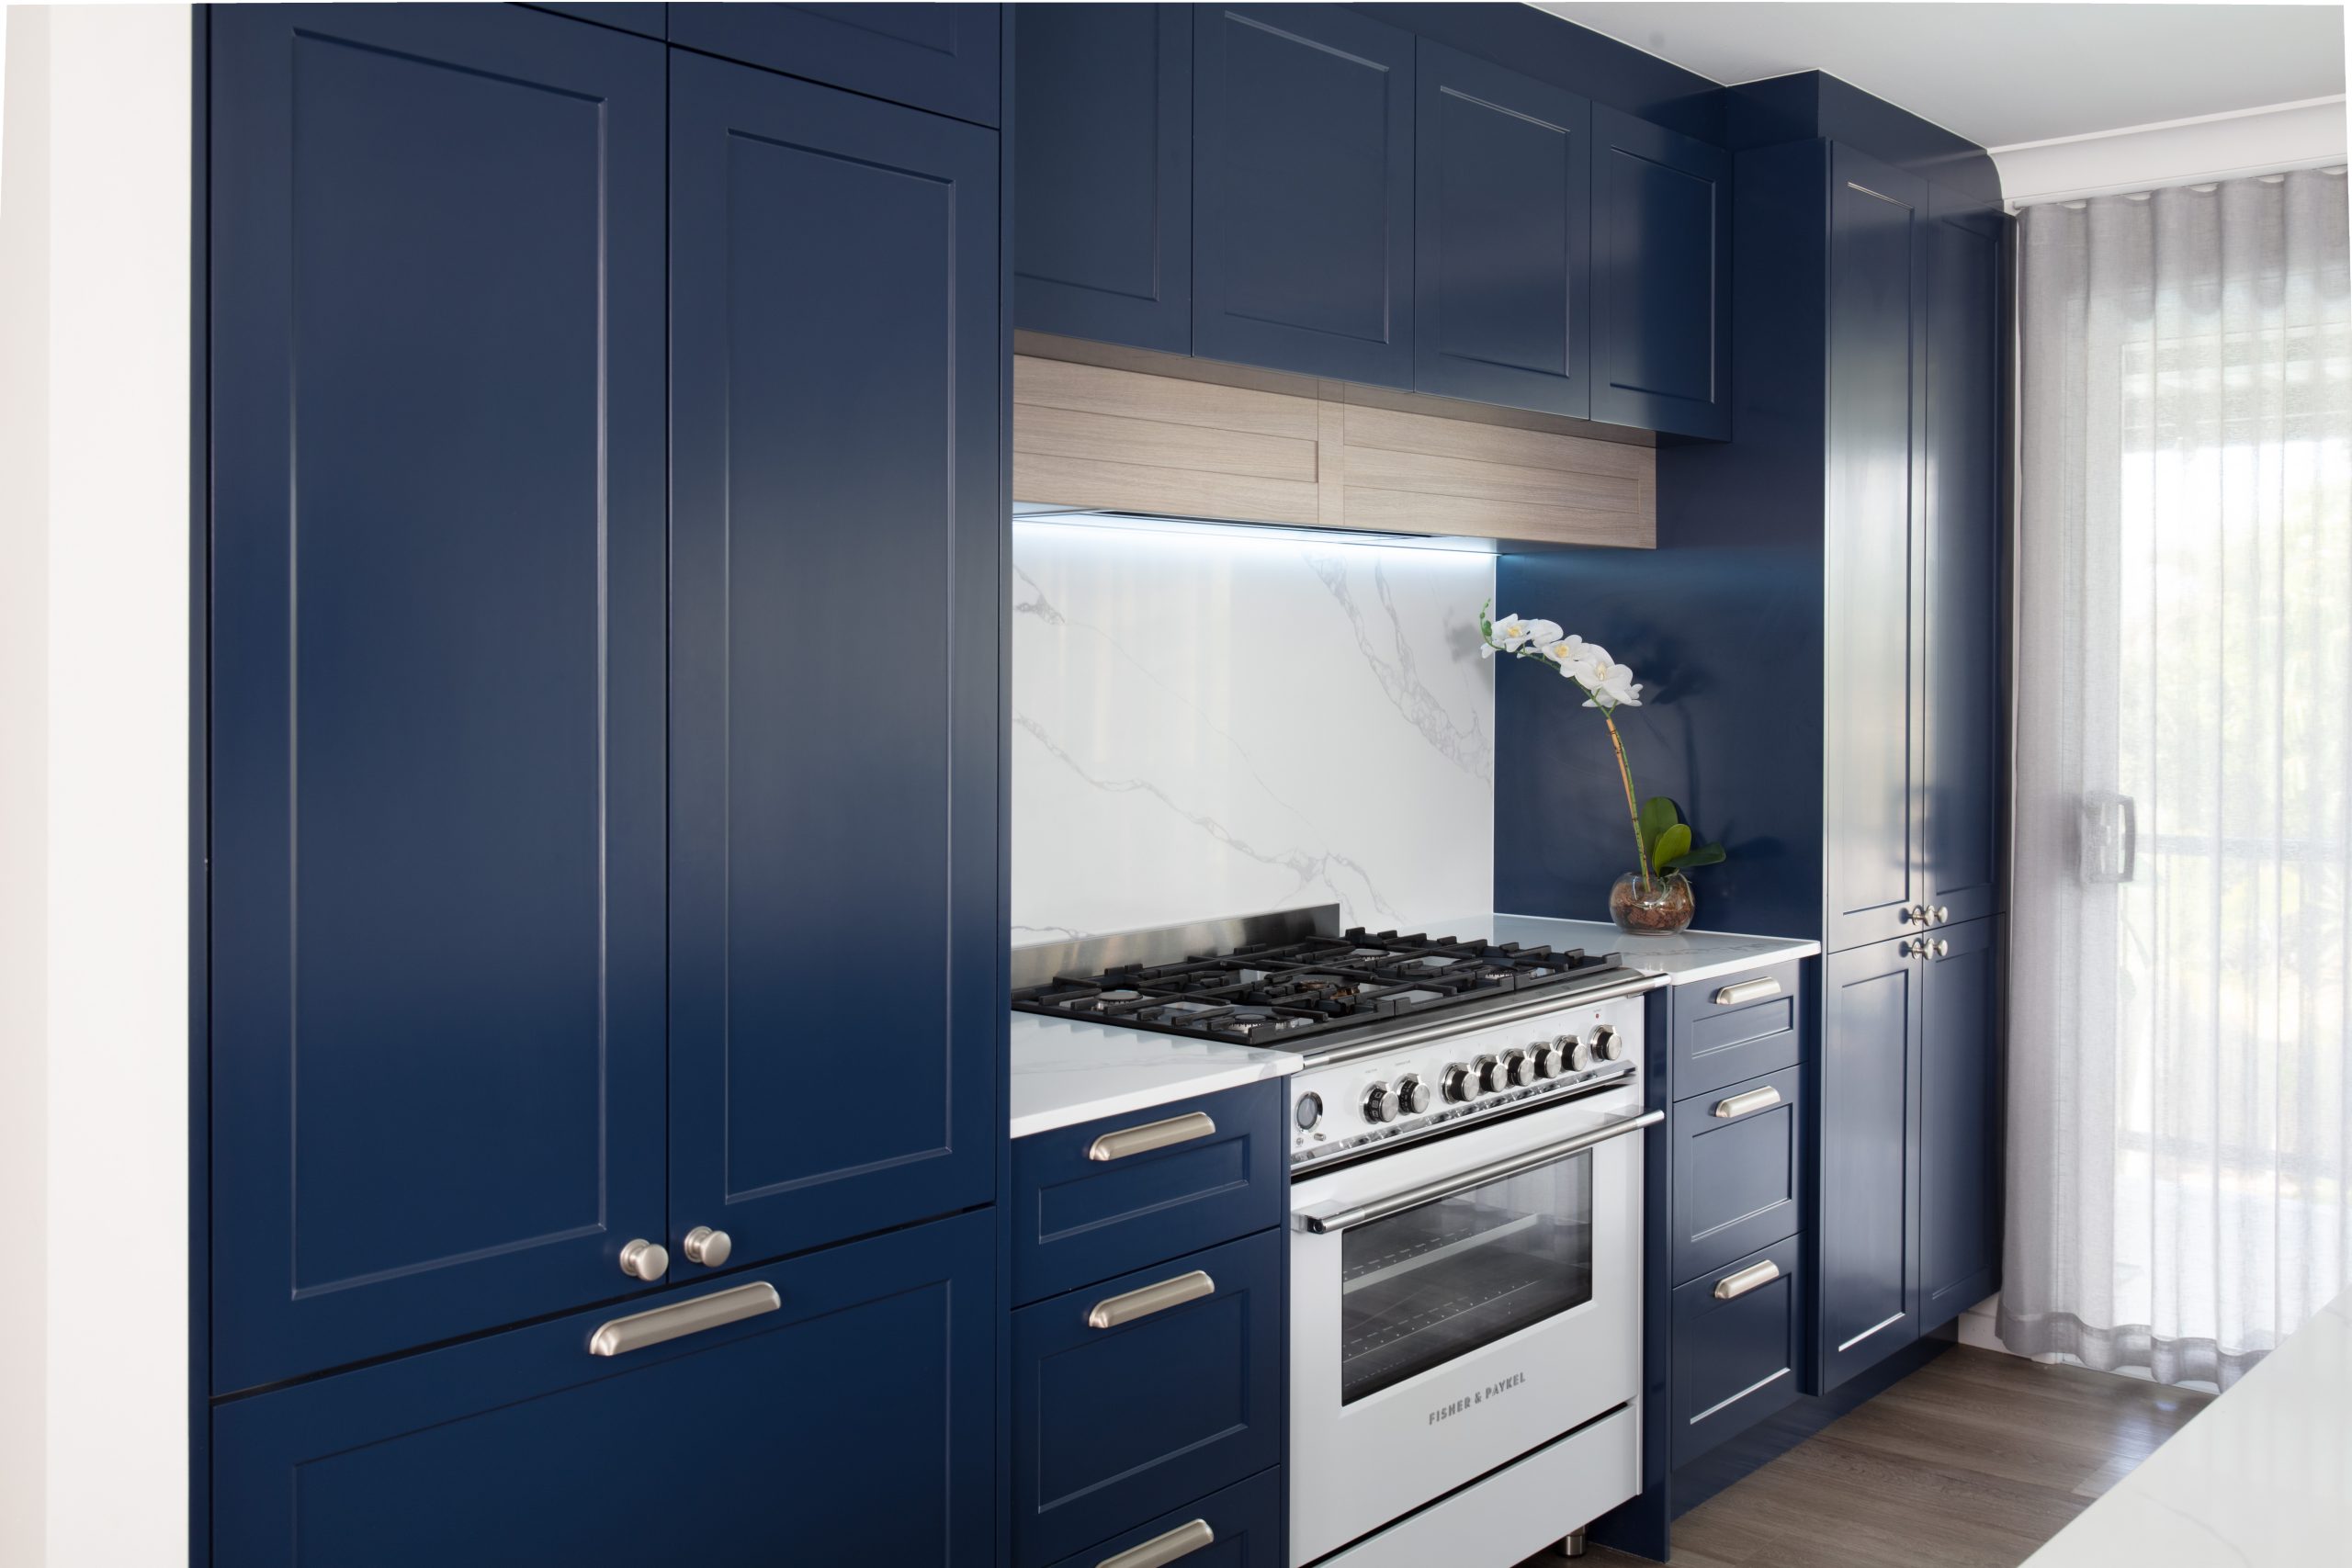 Luxury kitchen cabinets in a blue colour scheme to make a bold statement in the kitchen.